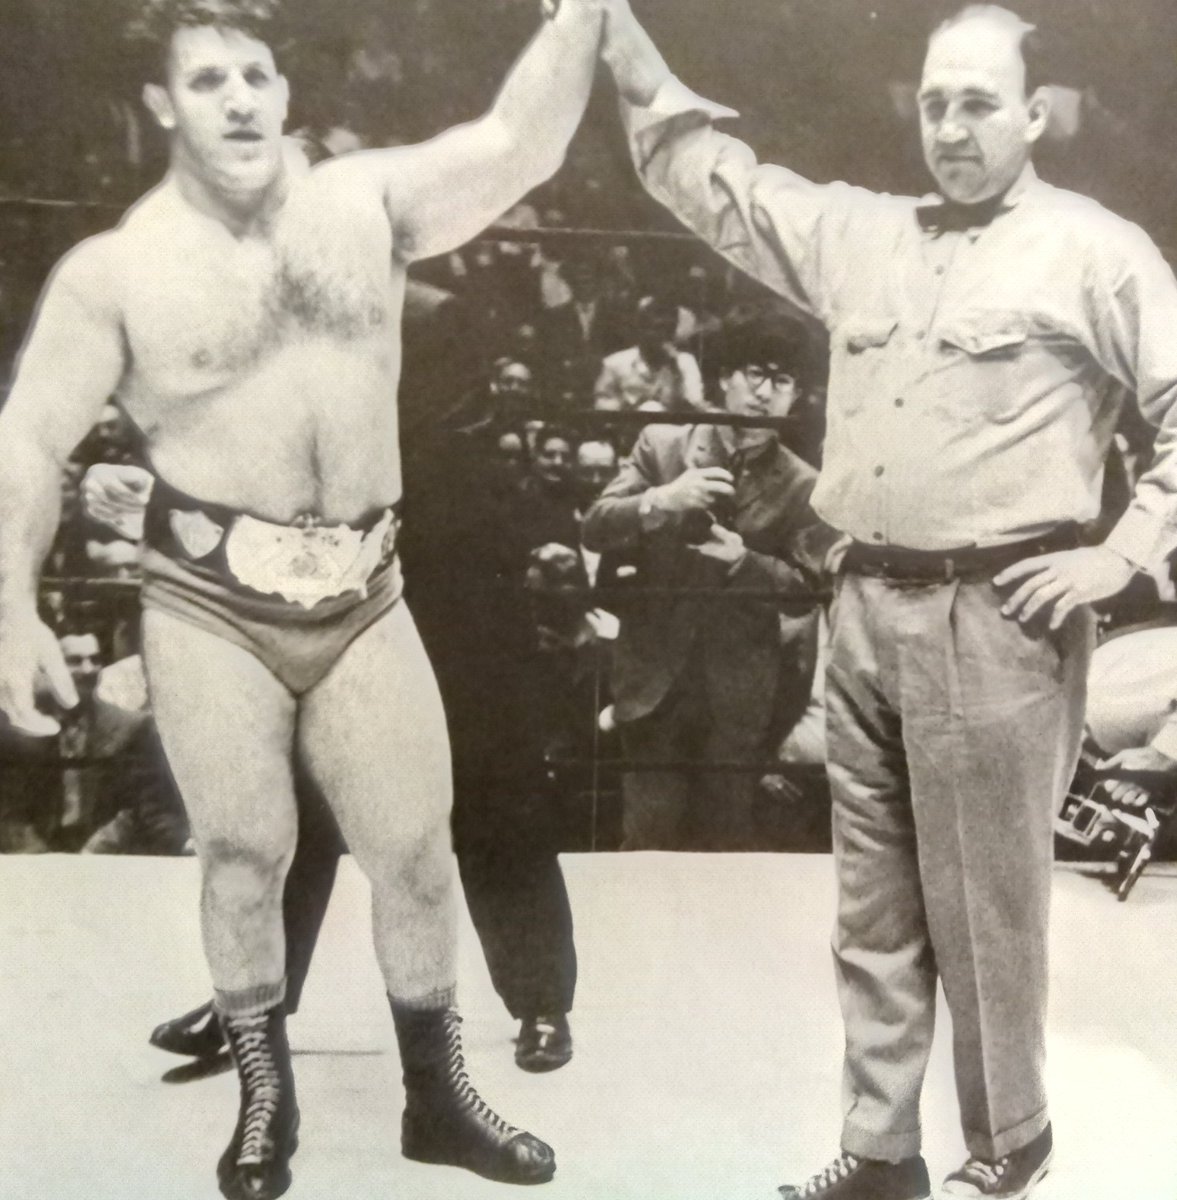 Allan on Twitter: "#OnThisDay in 1963: Bruno Sammartino made history when he won the WWWF World title in 48 seconds from Buddy Rogers. https://t.co/iY0gxqnTMs" / Twitter